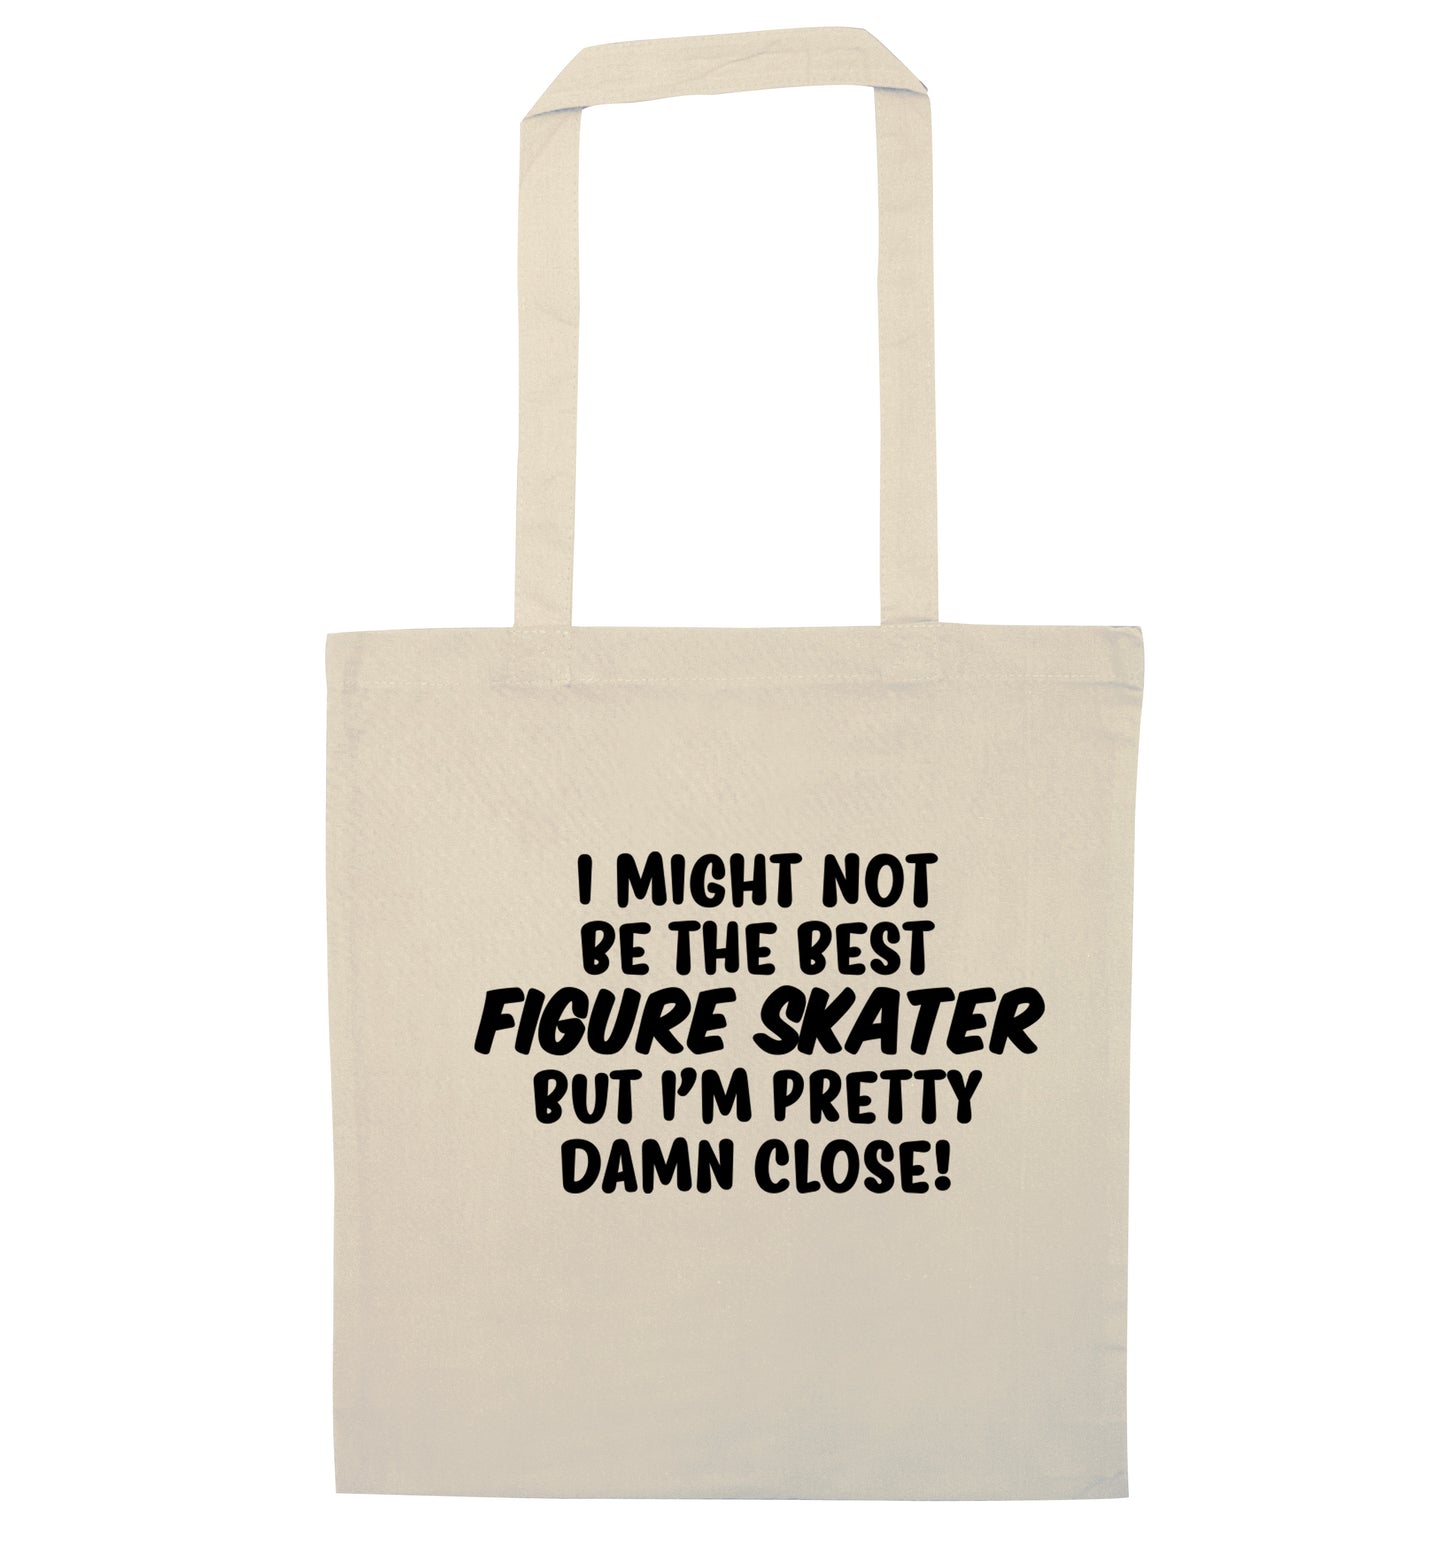 I might not be the best figure skater but I'm pretty damn close! natural tote bag